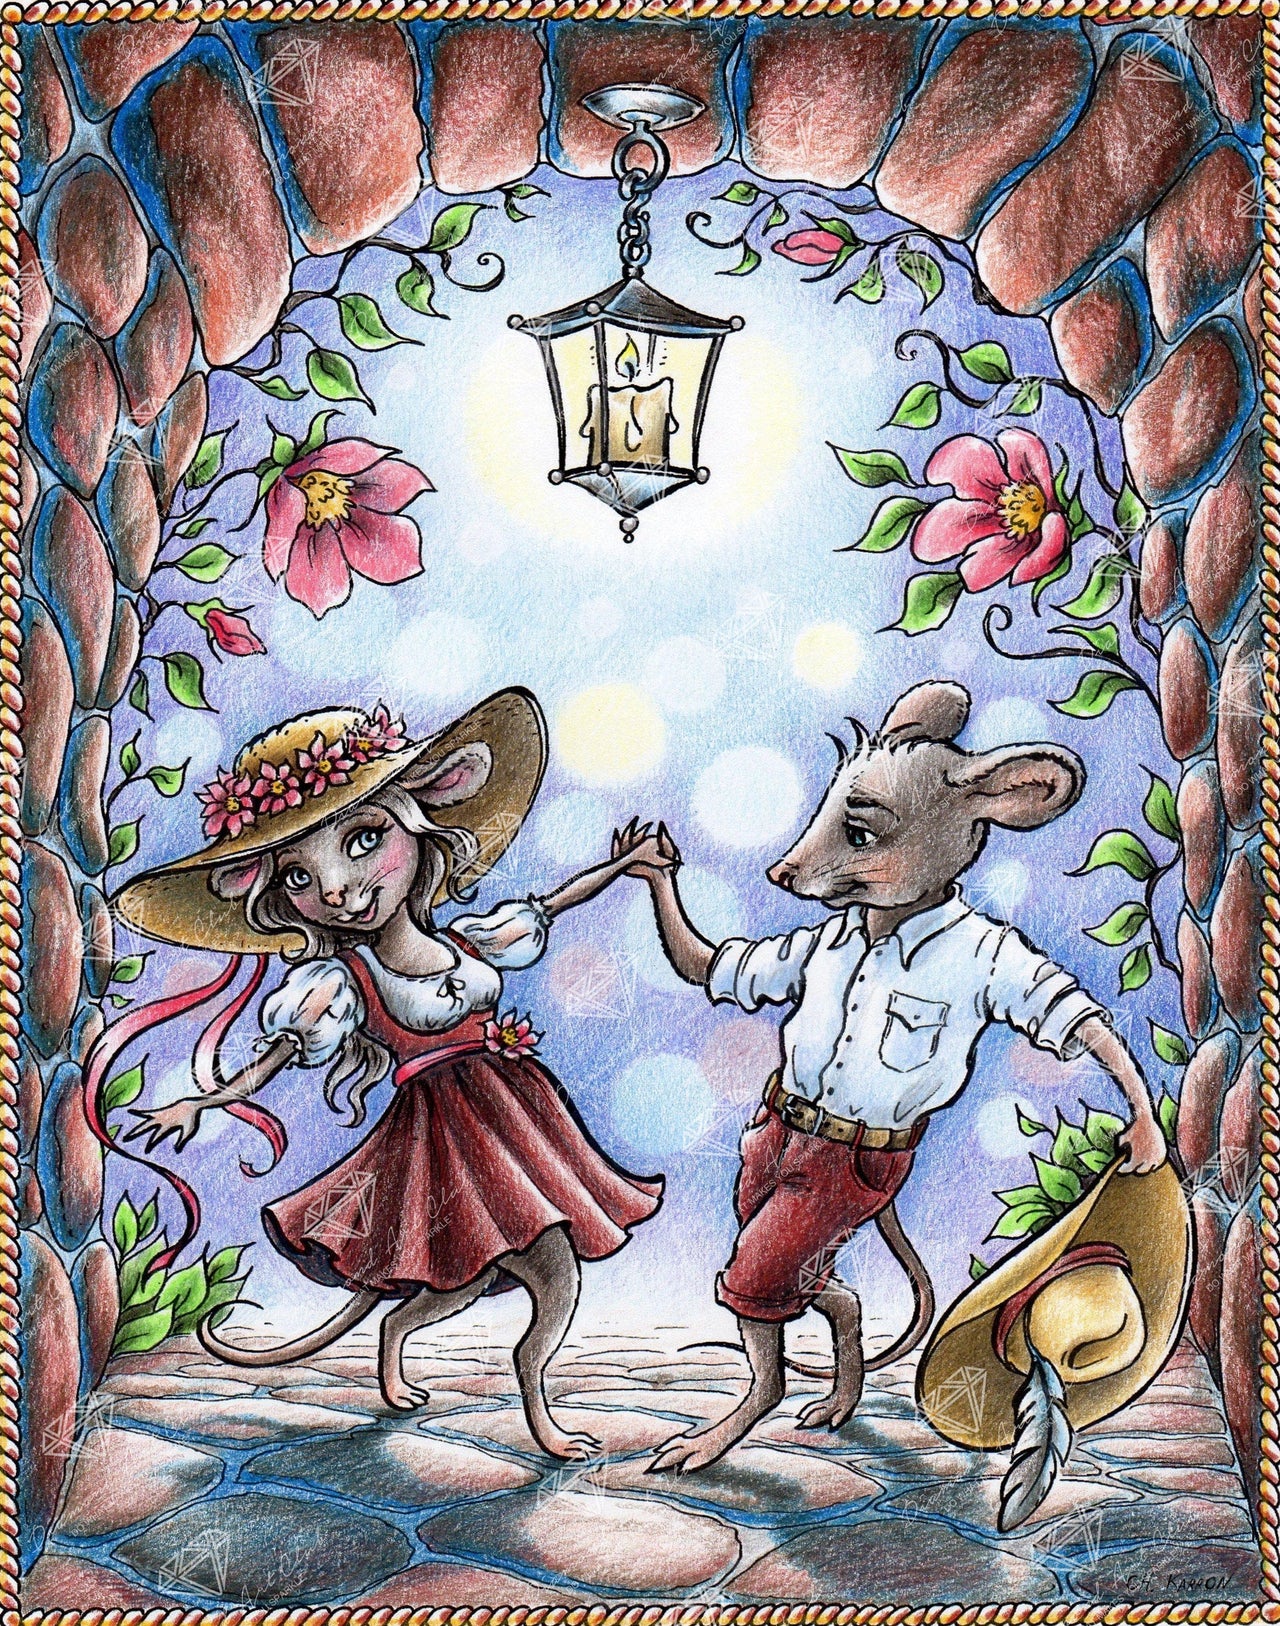 Diamond Painting Dancing Mouse Couple 22" x 28″ (56cm x 71cm) / Square with 49 Colors including 2 ABs / 62,600